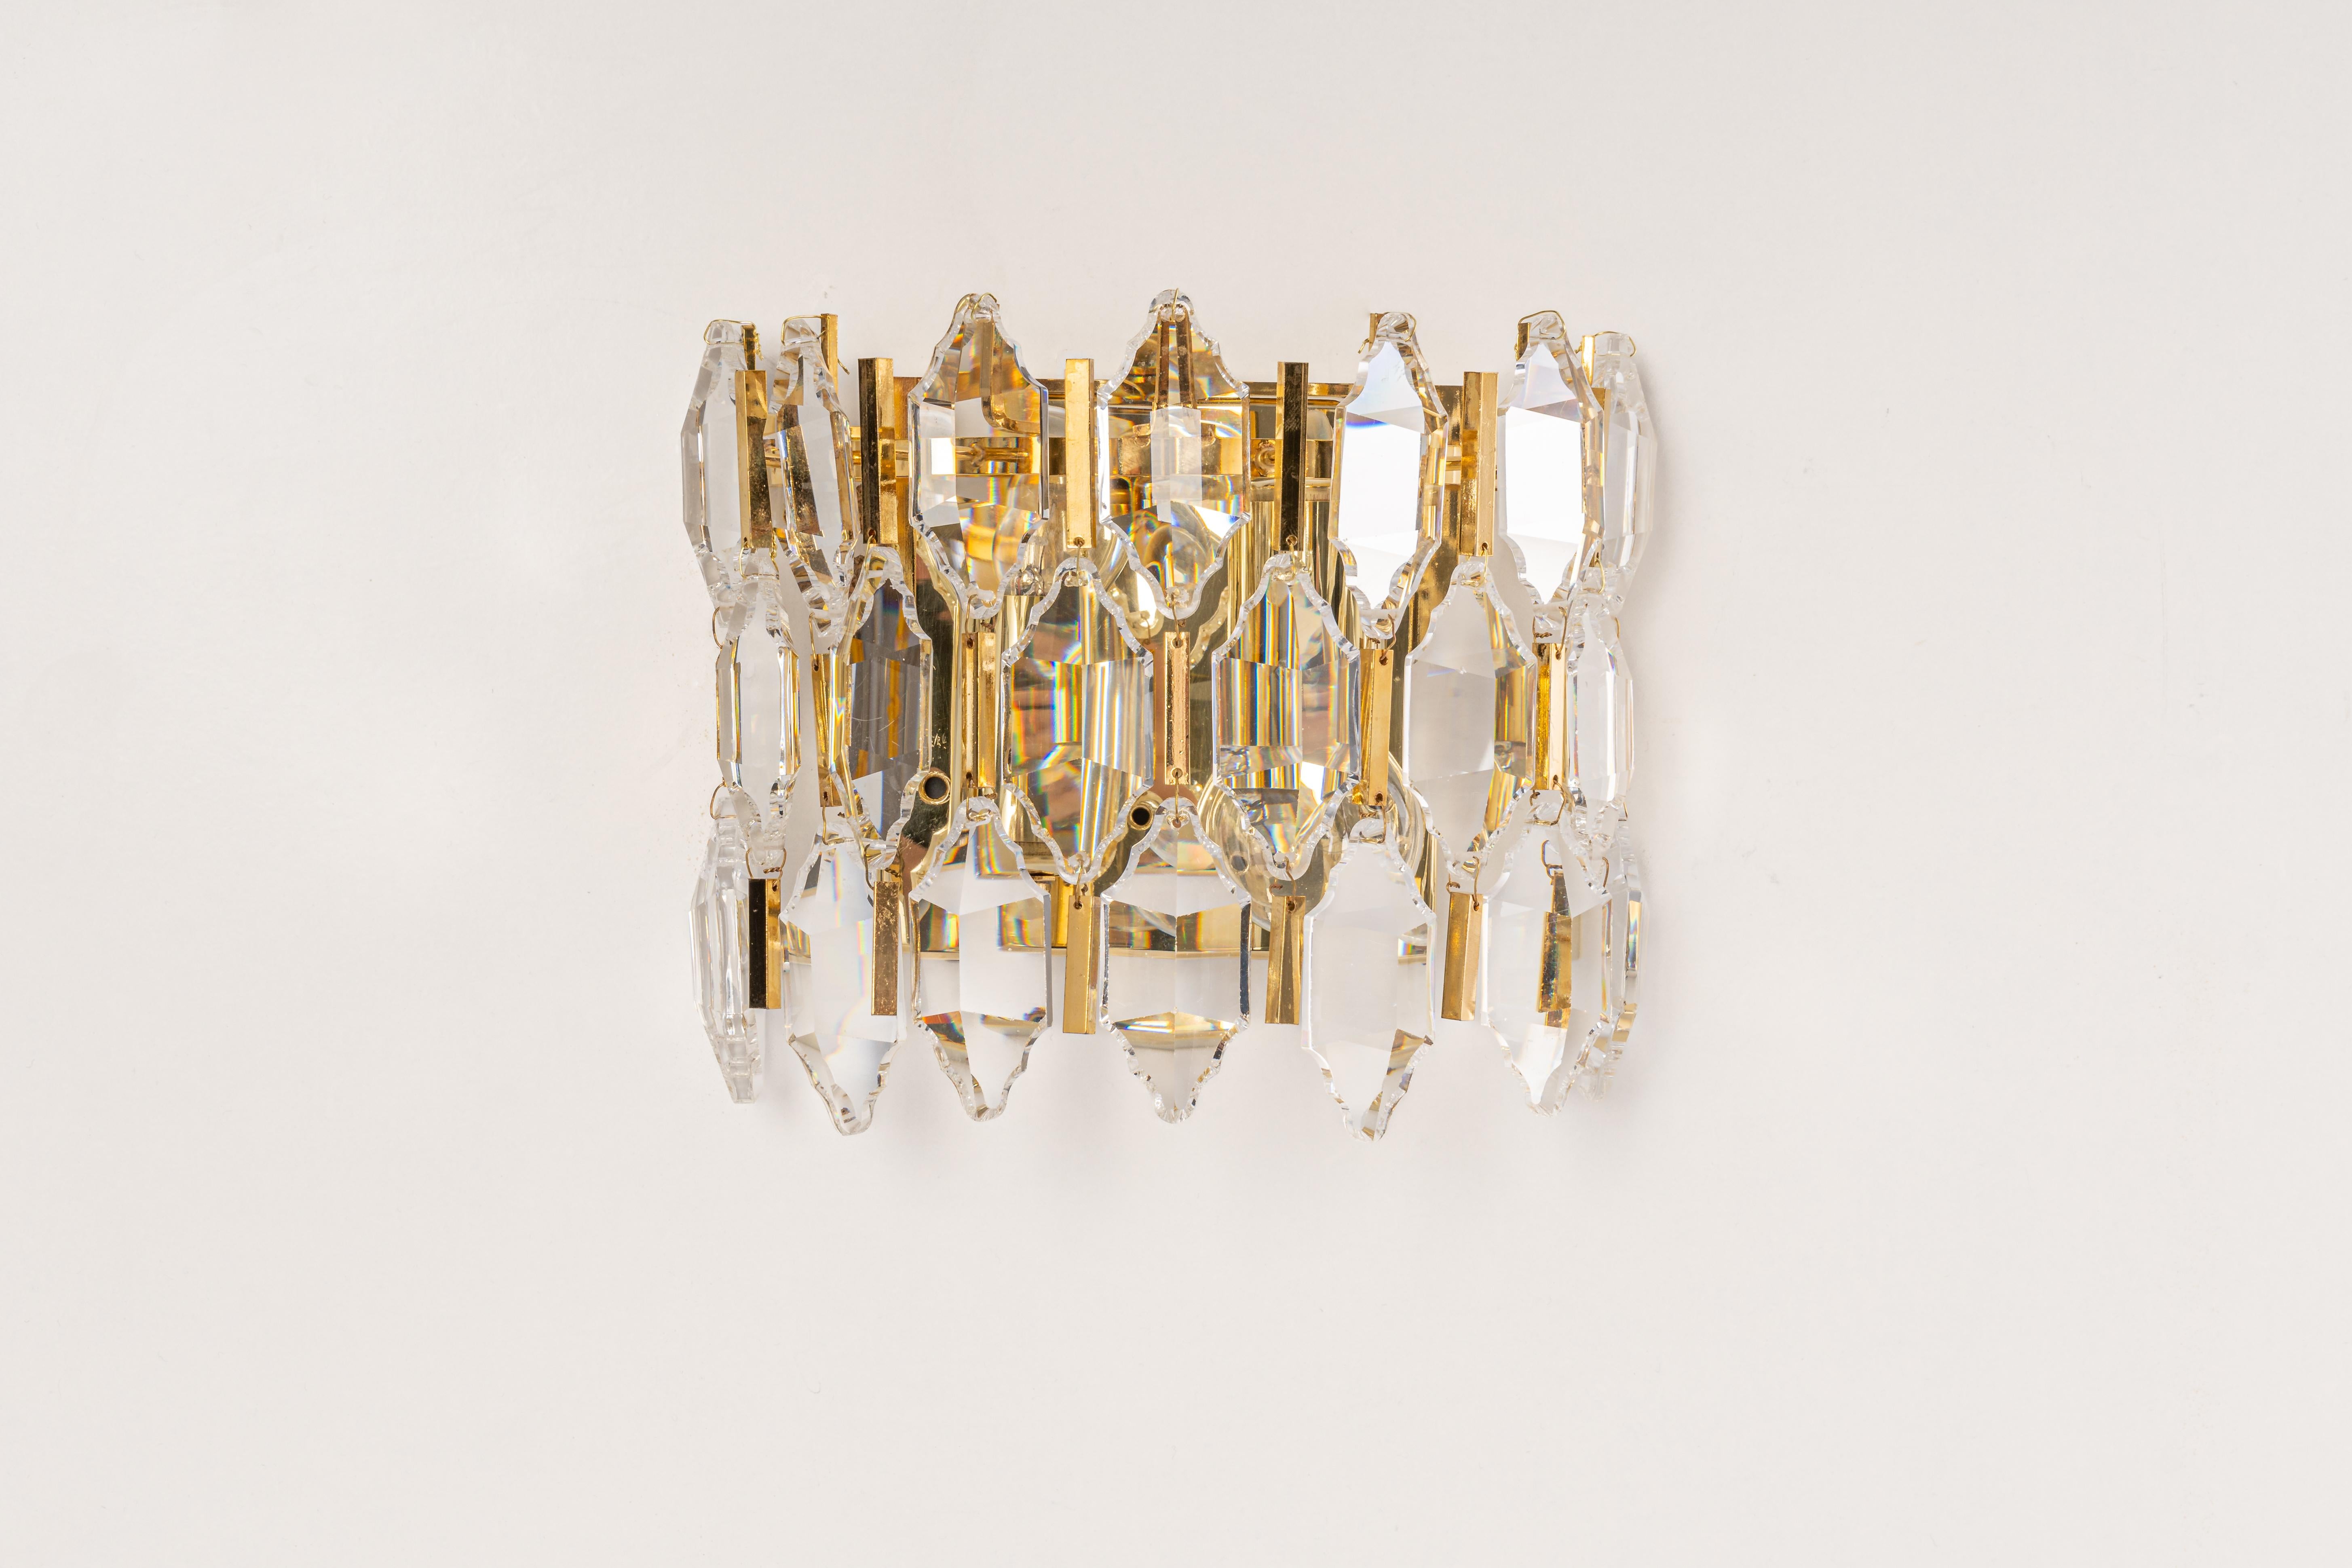 A stunning pair of golden sconces made by Palwa, Germany, circa 1970-1979. It’s composed of crystal glass pieces on a gilded brass frame.
Best of the 1970s from Germany.

Heavy quality and in very good condition. Cleaned, well-wired, and ready to